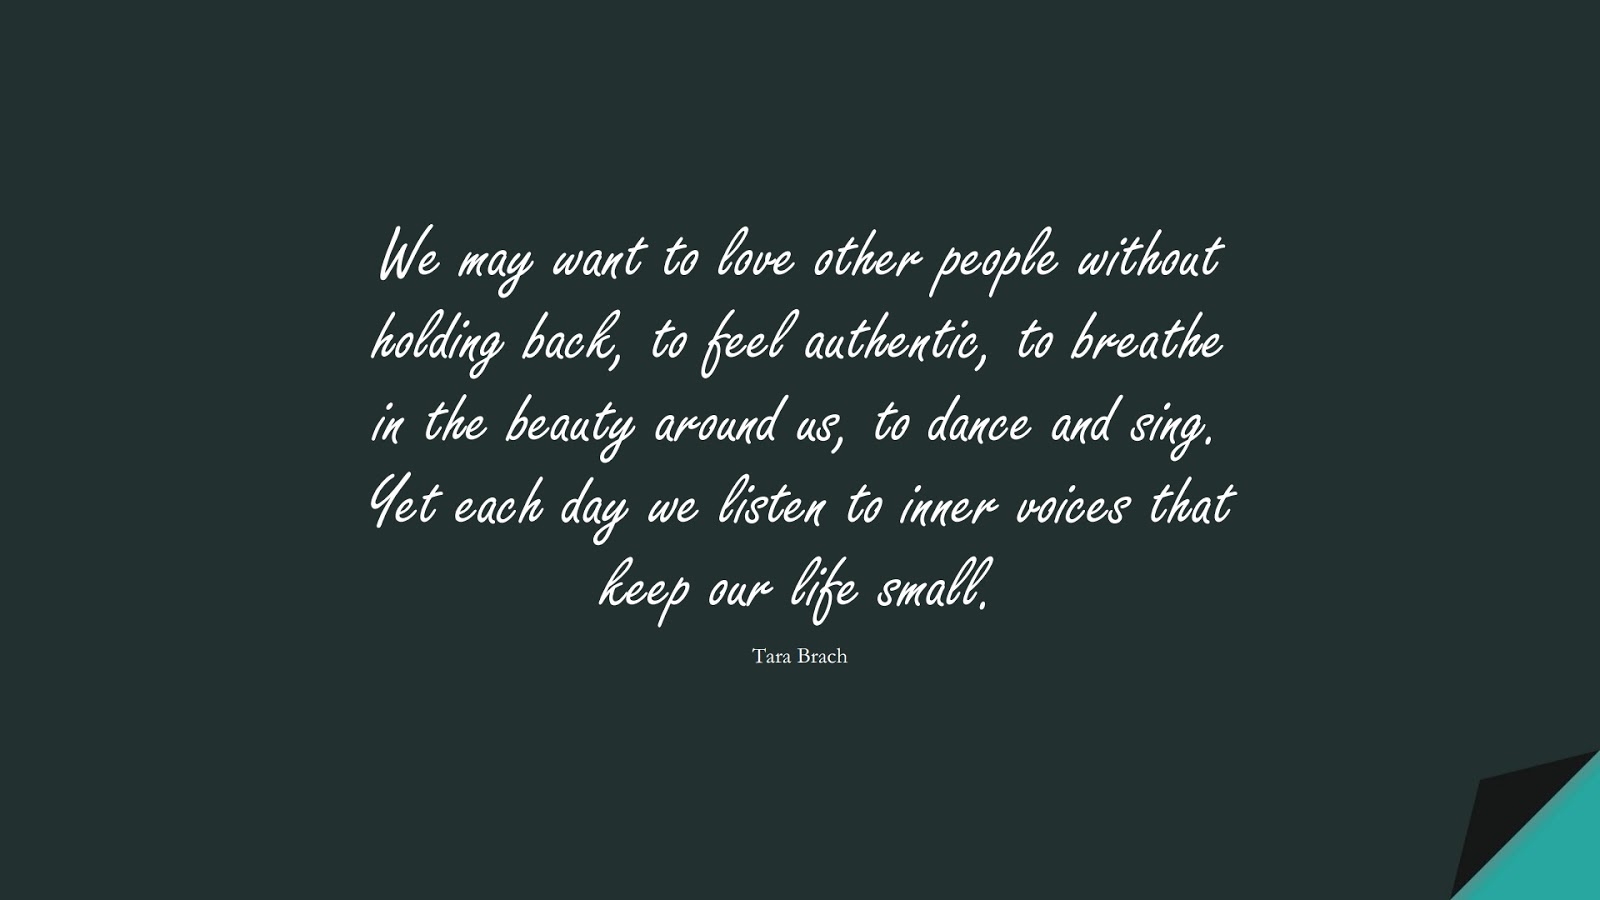 We may want to love other people without holding back, to feel authentic, to breathe in the beauty around us, to dance and sing. Yet each day we listen to inner voices that keep our life small. (Tara Brach);  #LoveQuotes